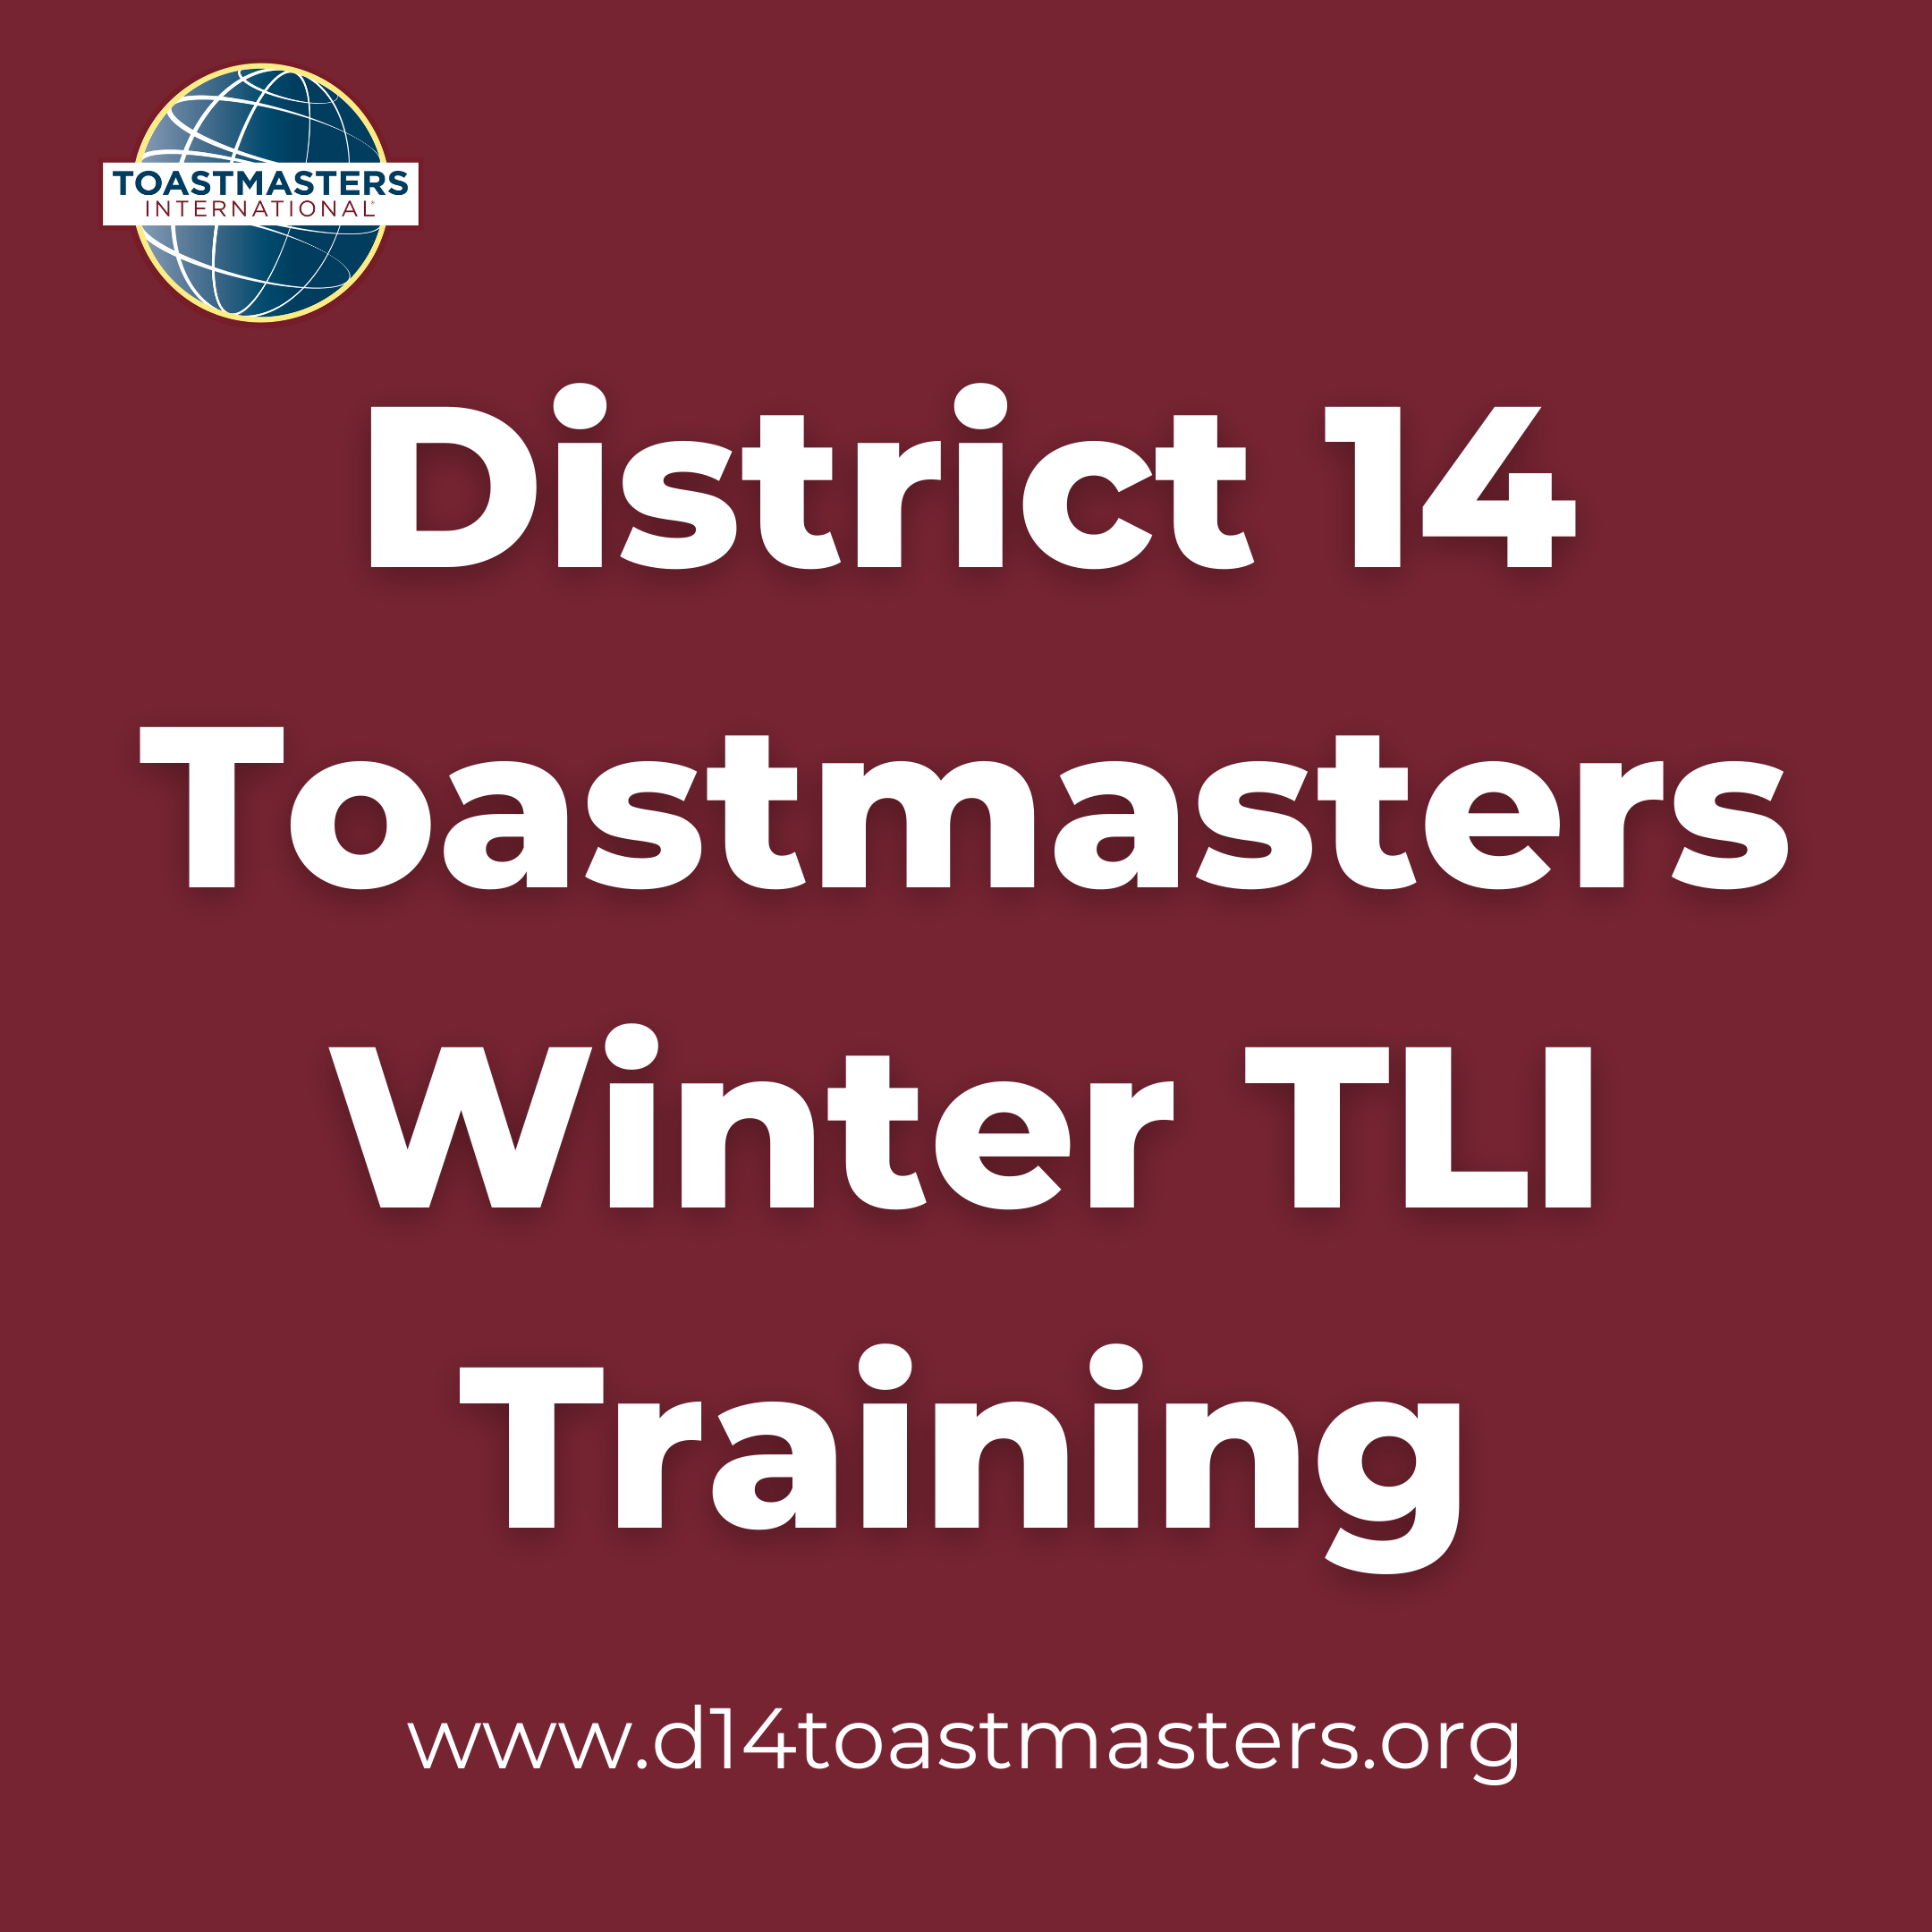 District 14 Toastmasters Winter TLI Training